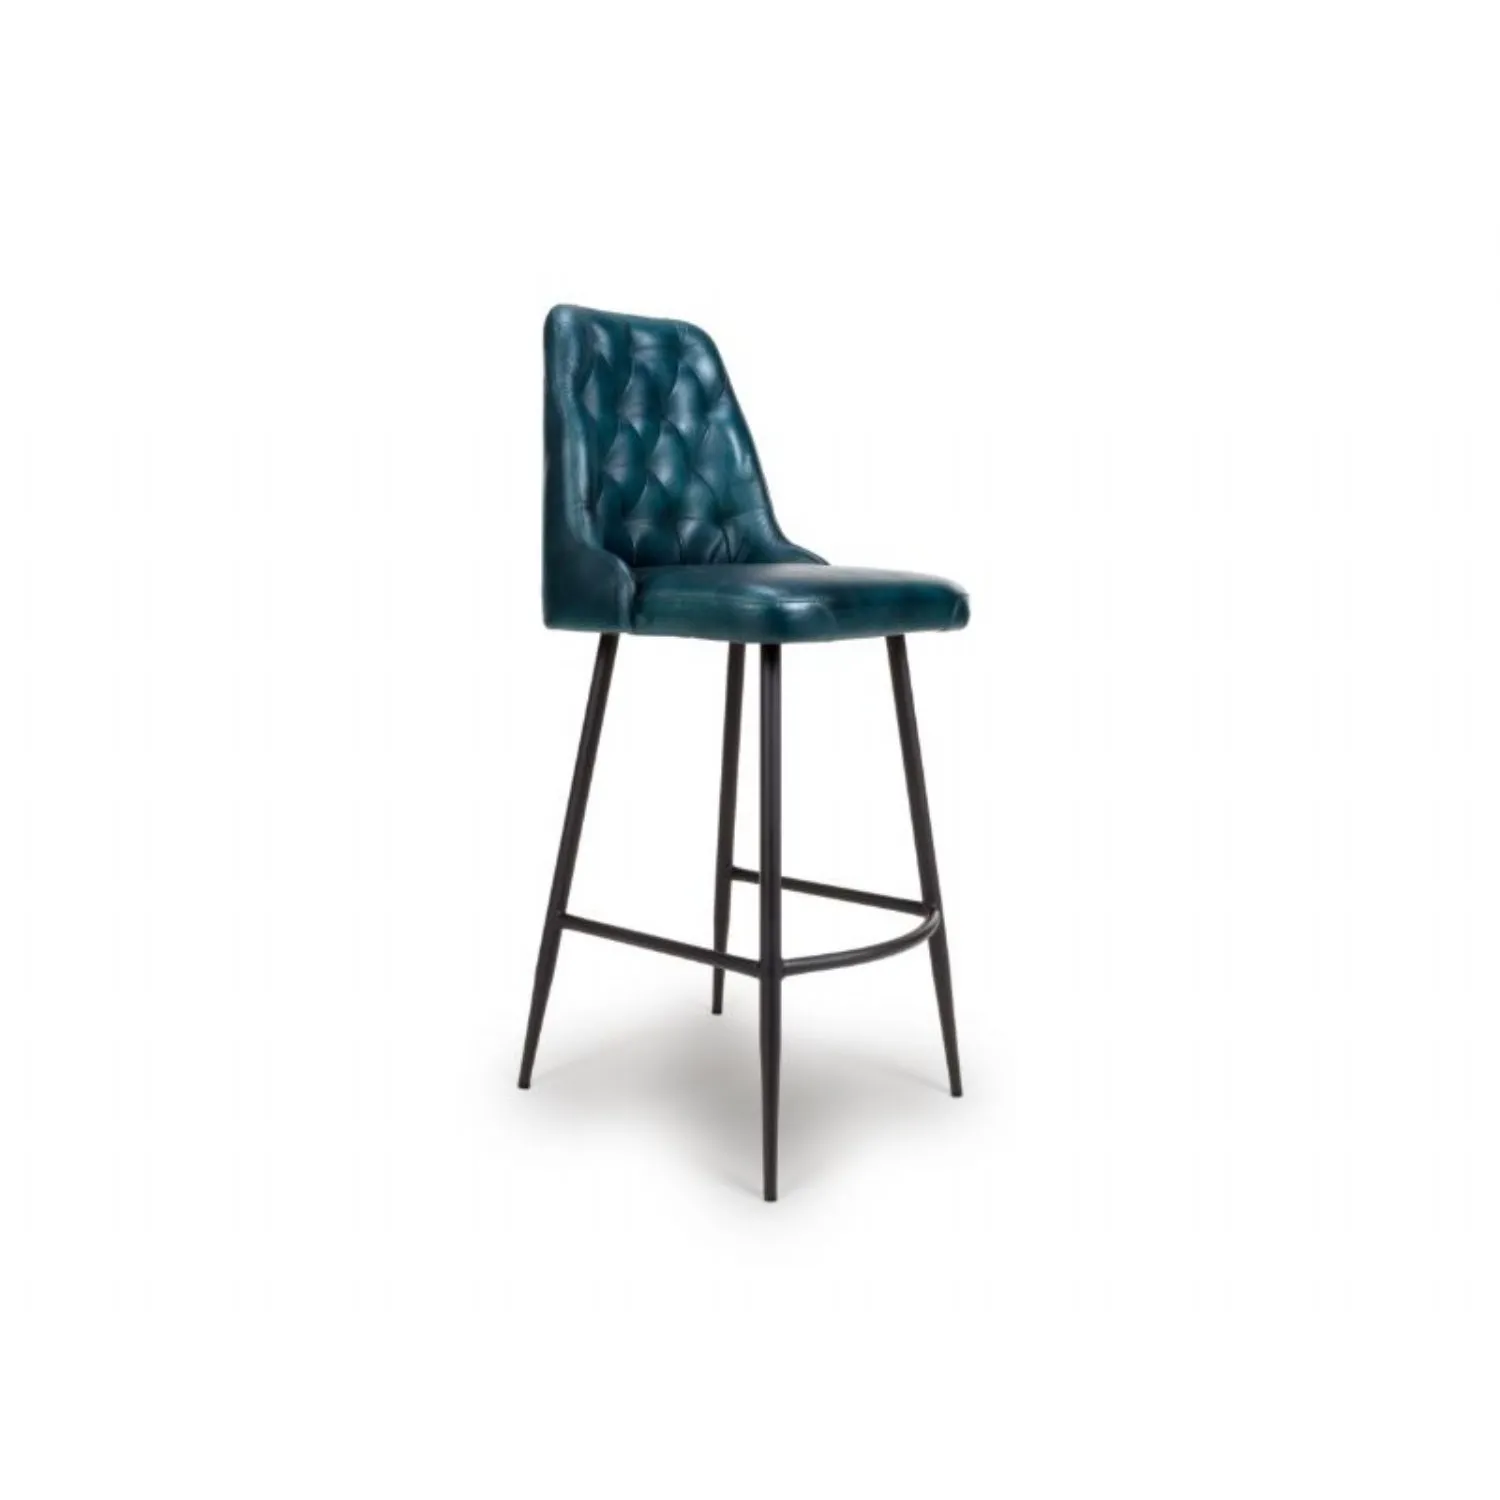 Blue Leather Bar Chair with Black Metal Legs